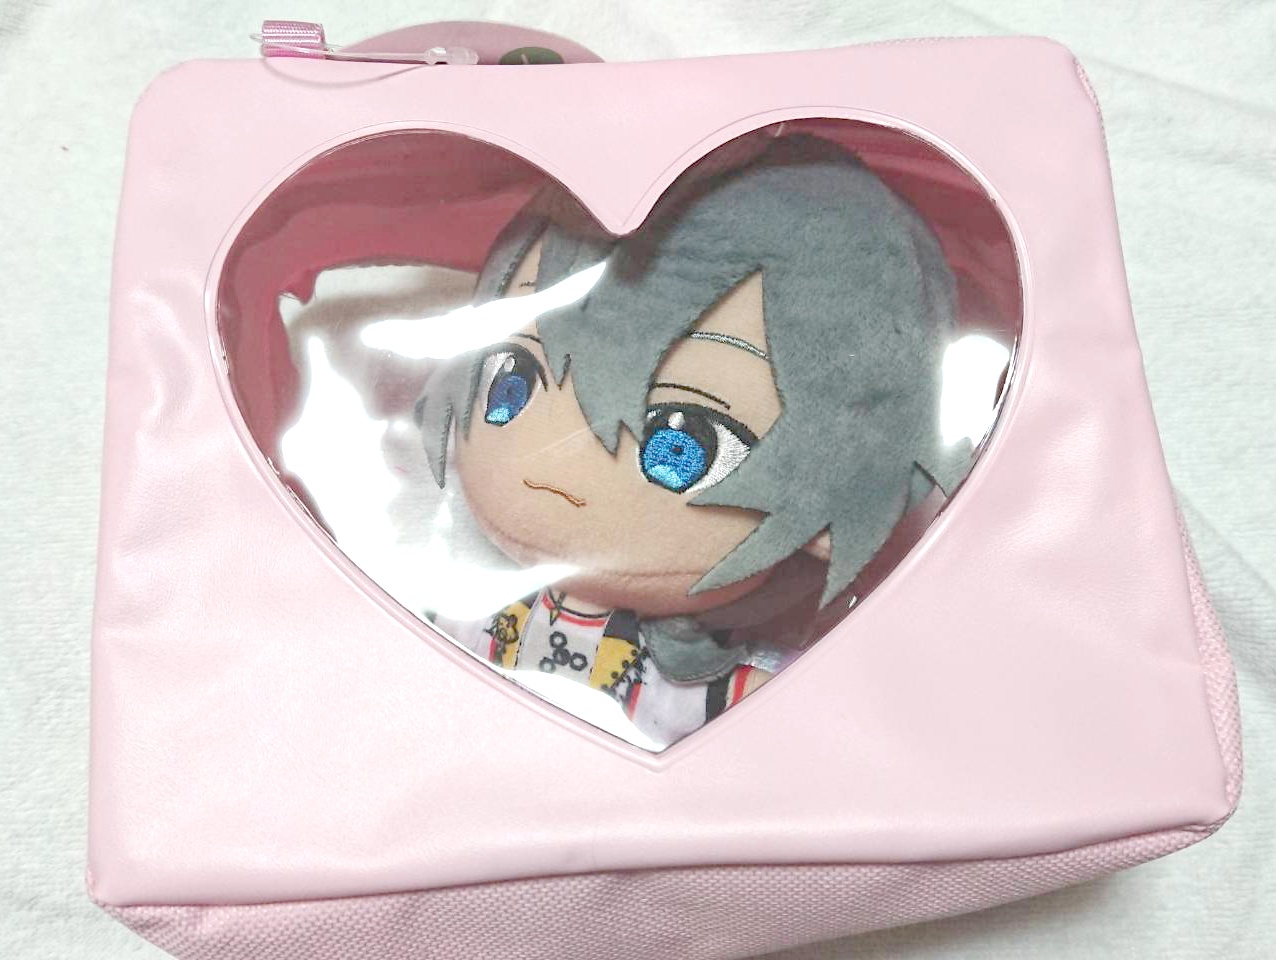 put a stuffed toy in the Ota Colle Stuffed Toy Pouch